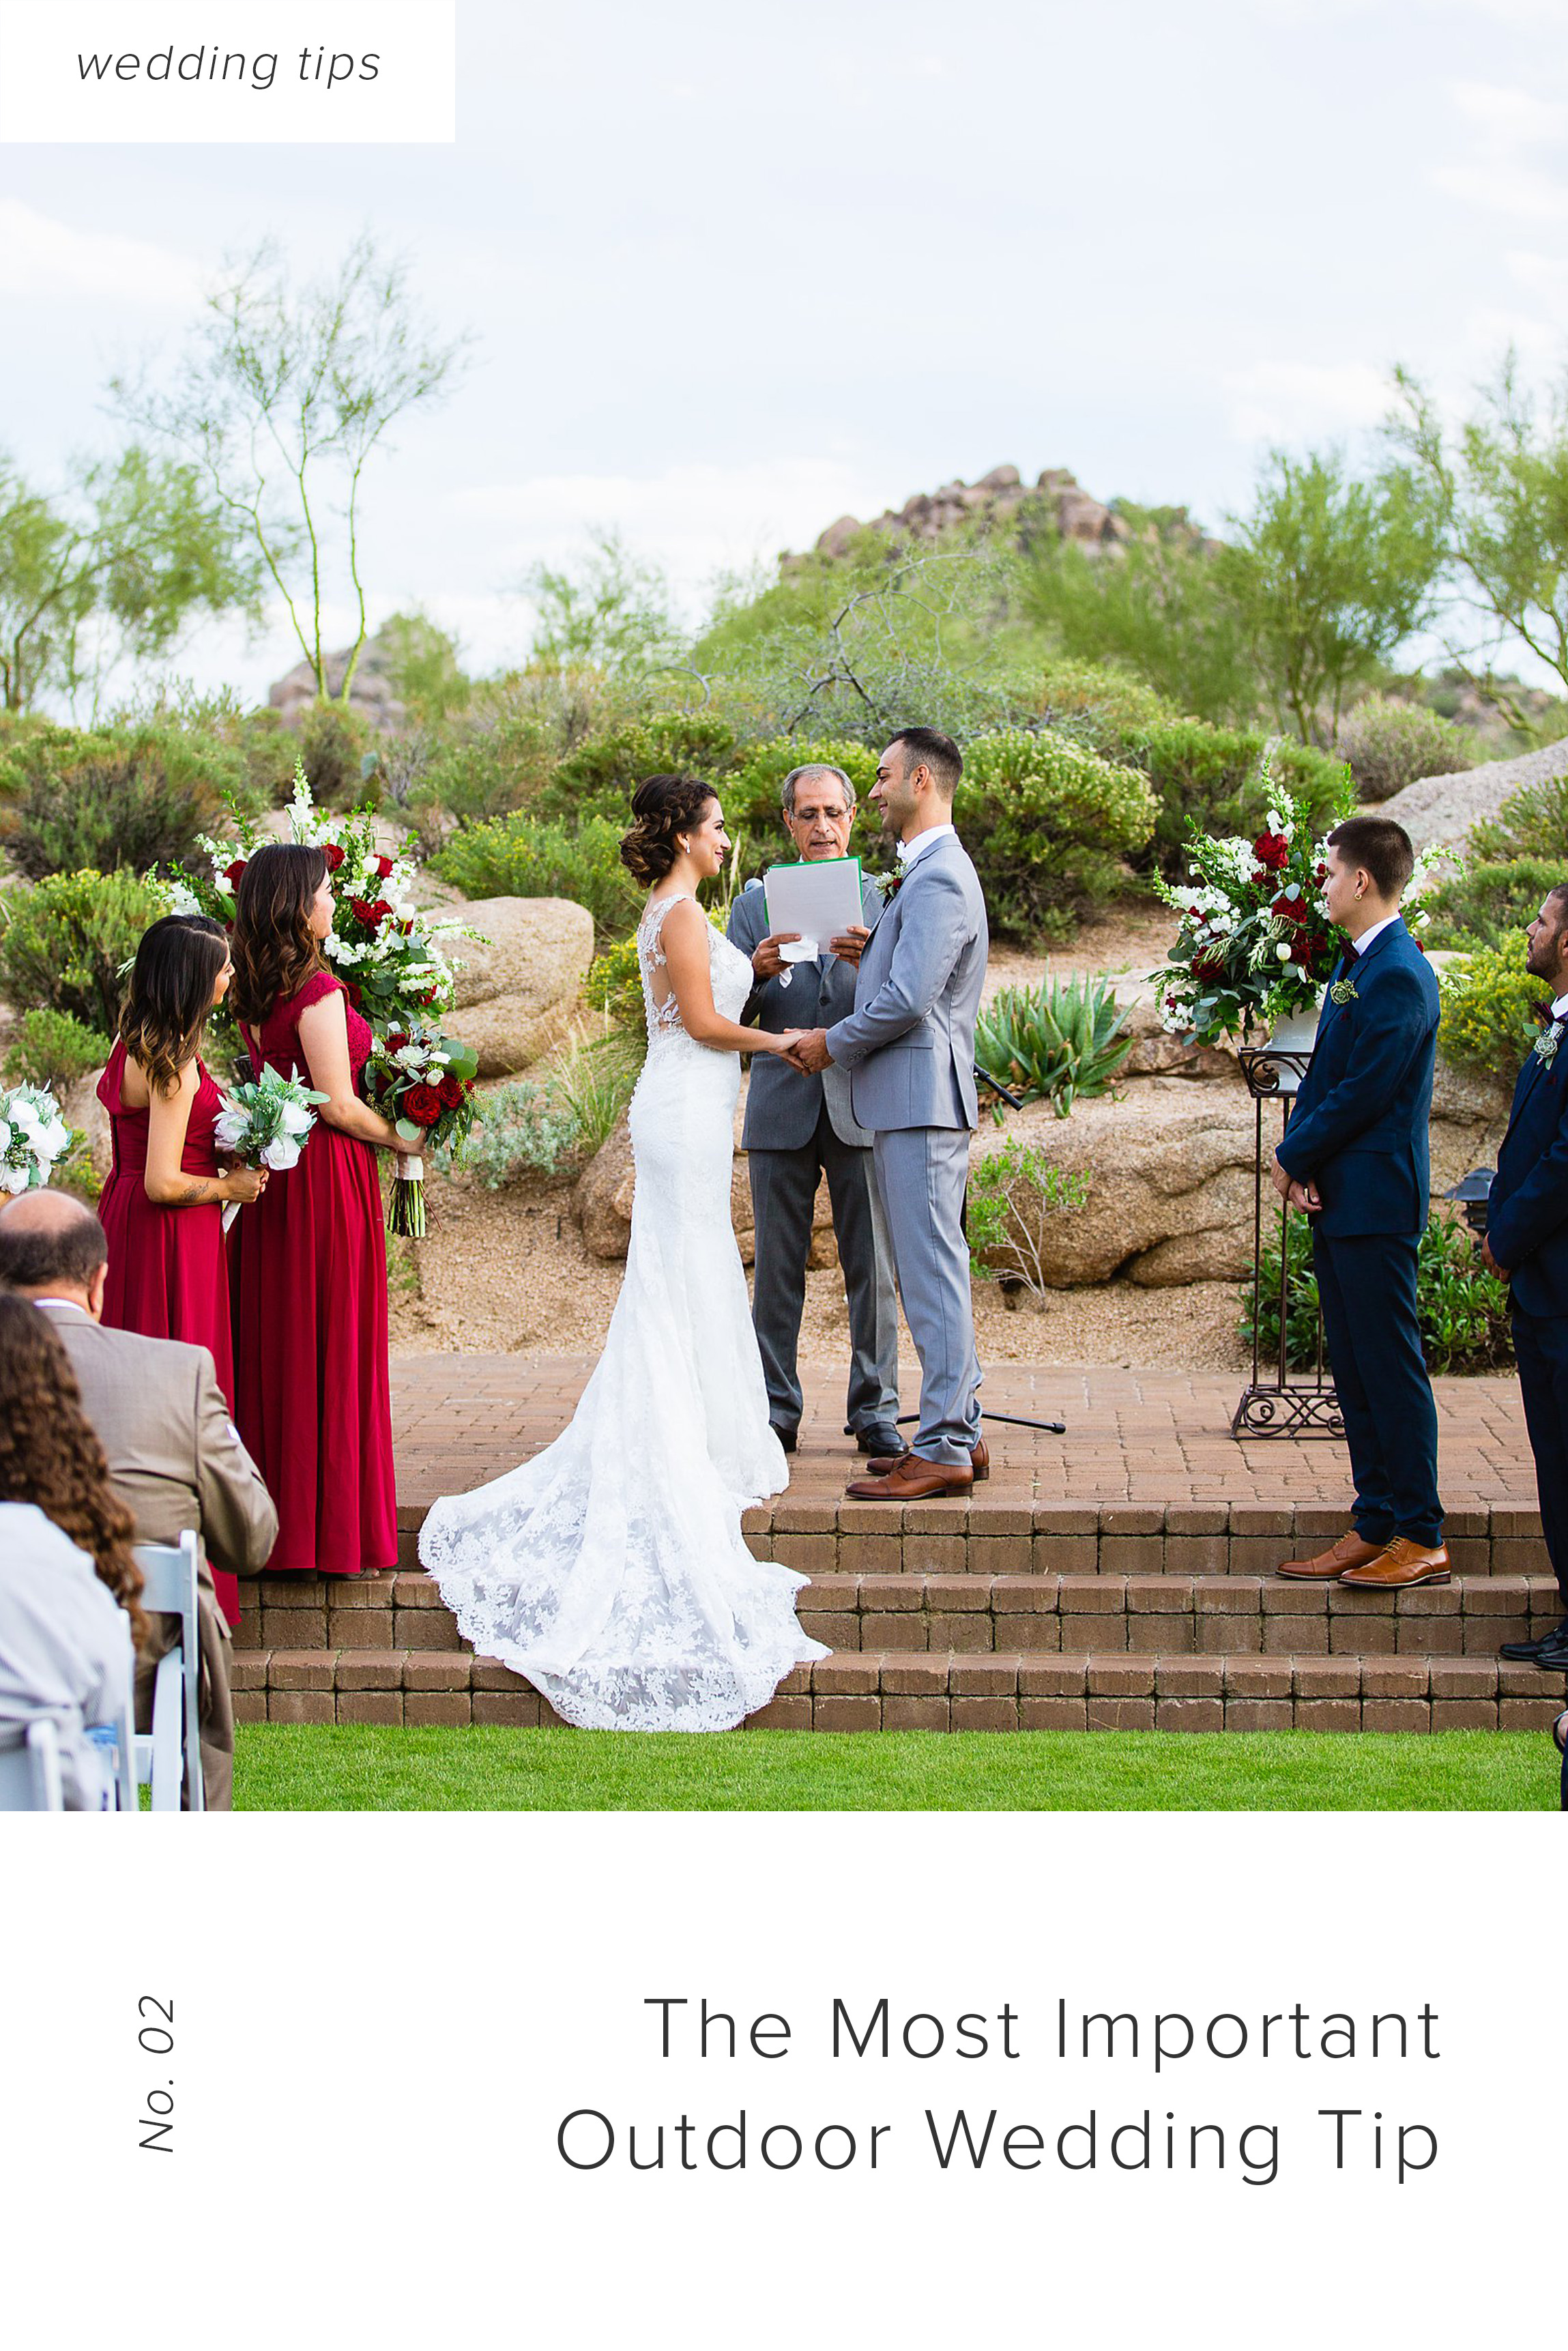 The most important outdoor wedding tip by professional Arizona wedding photographer PMA Photography.